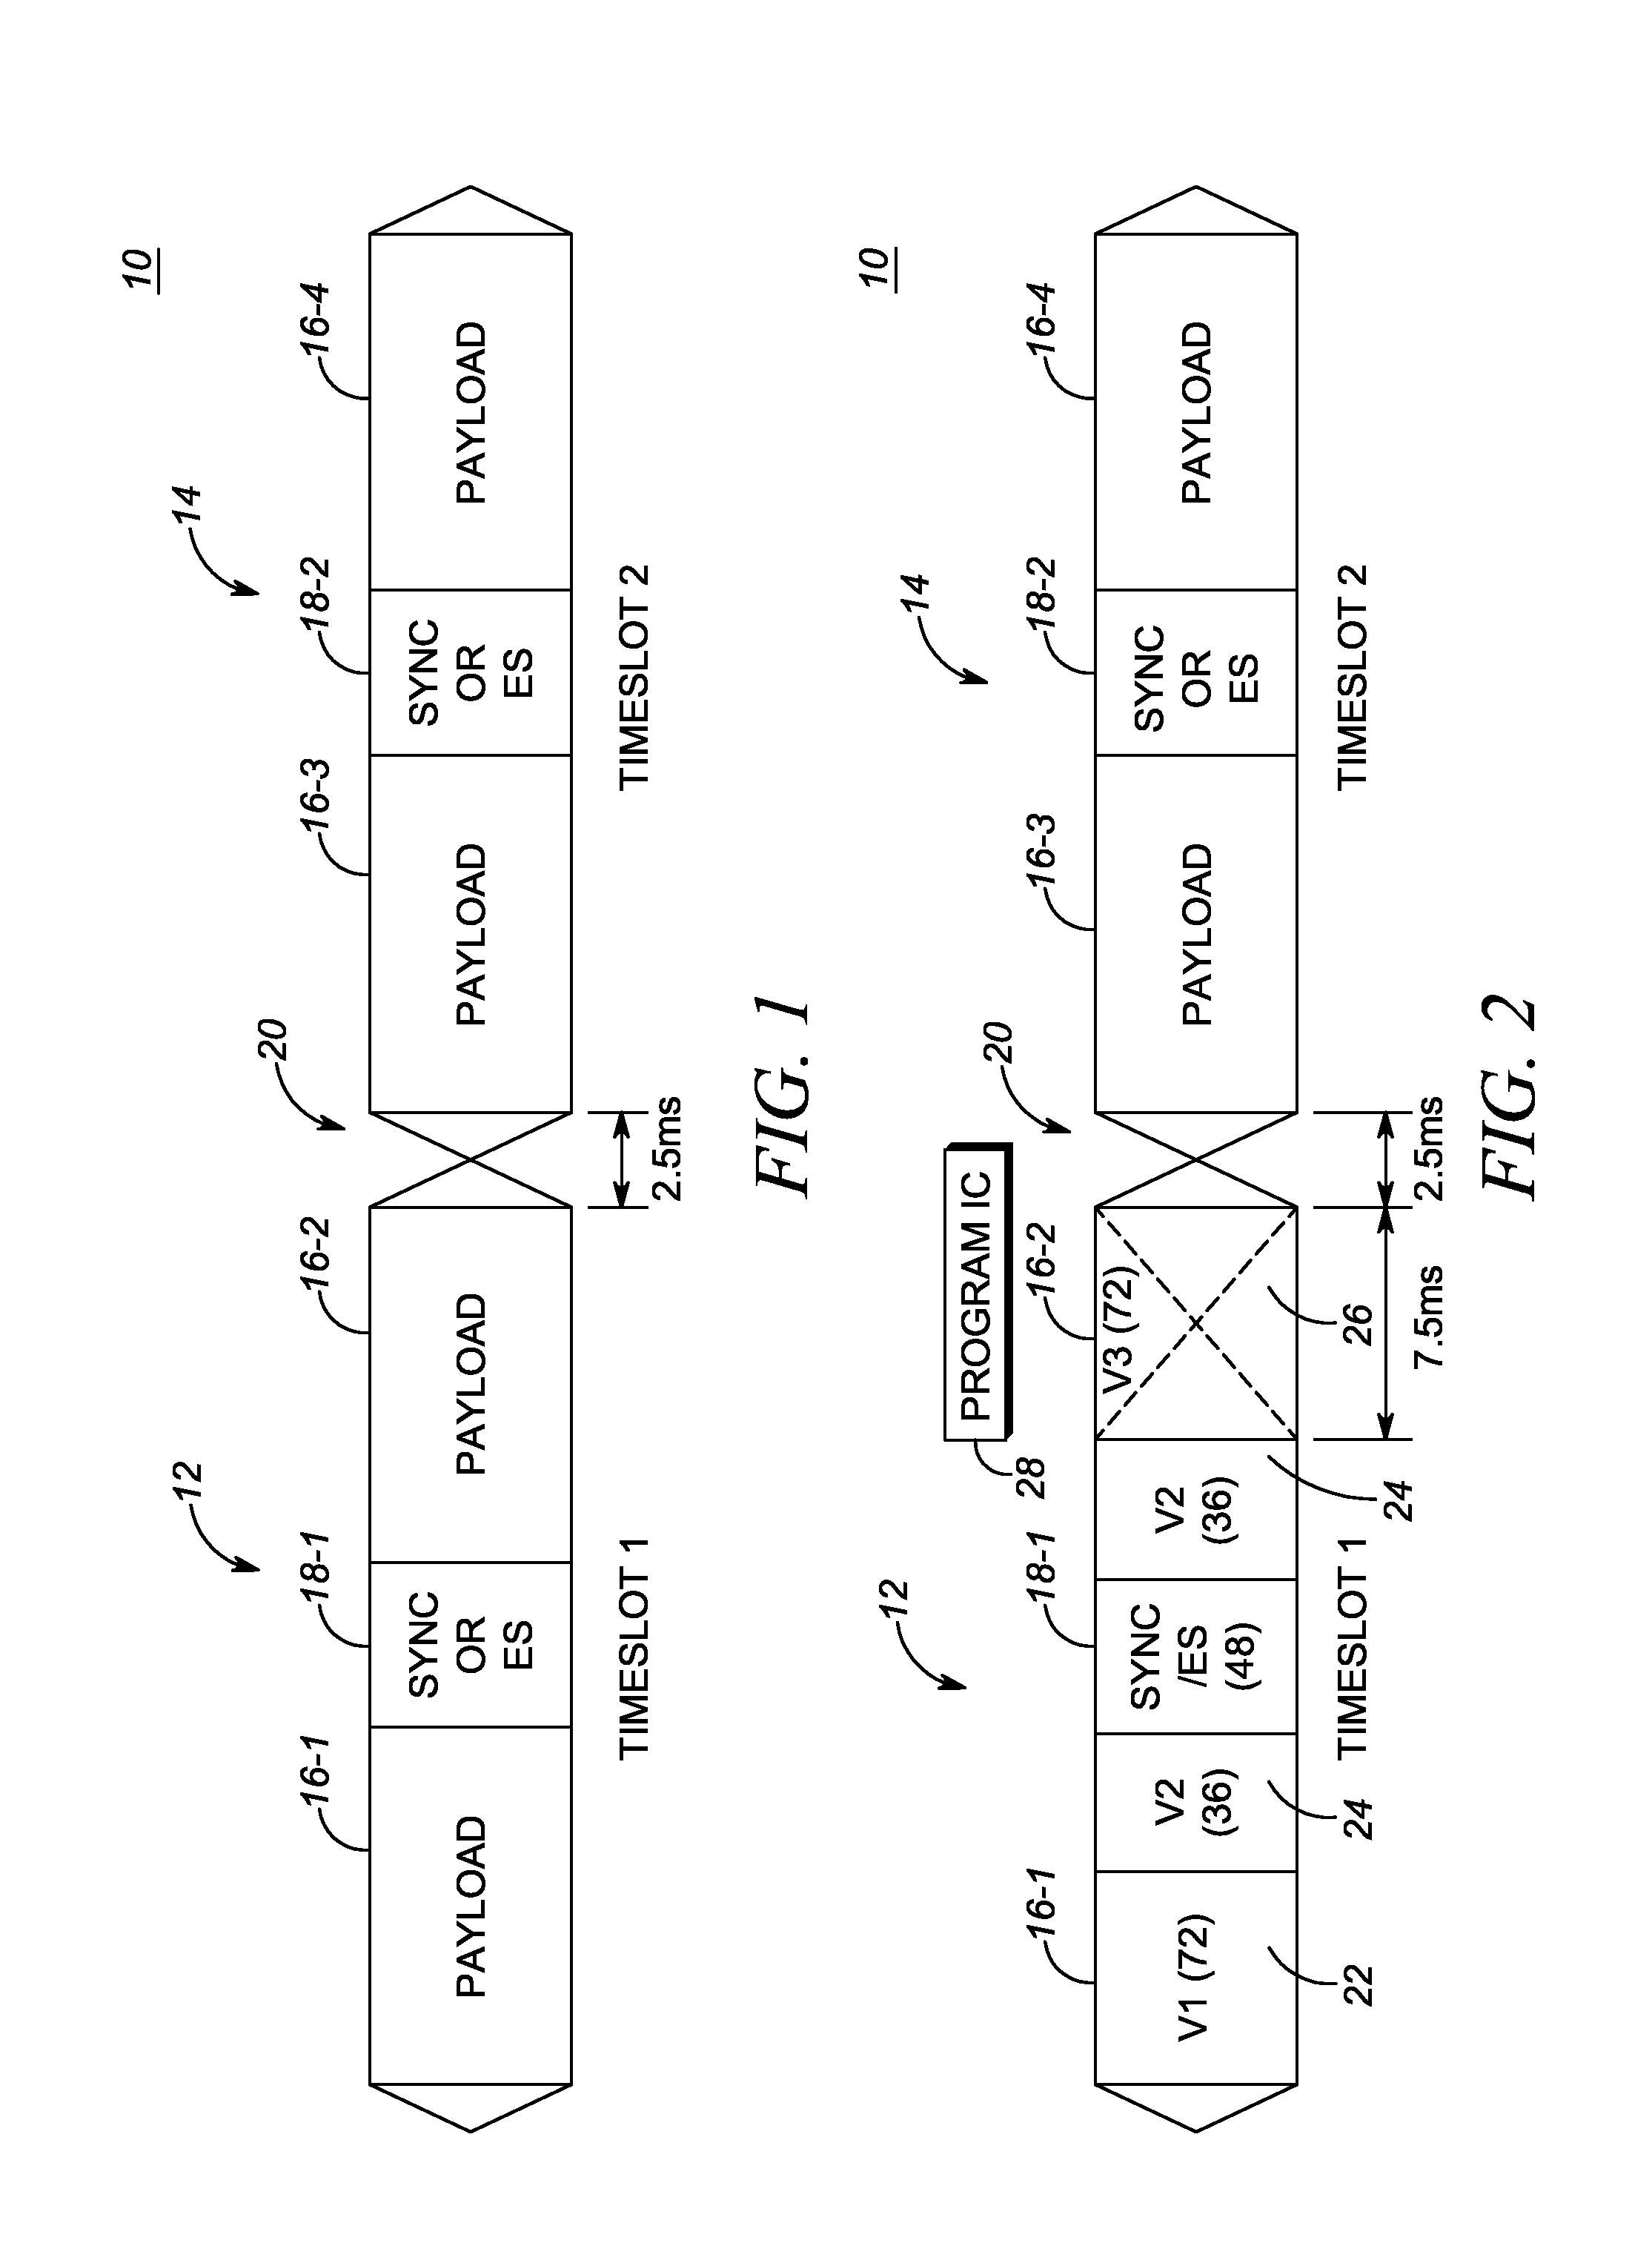 Method and apparatus for wirelessly transacting simultaneous voice and data on adjacent timeslots